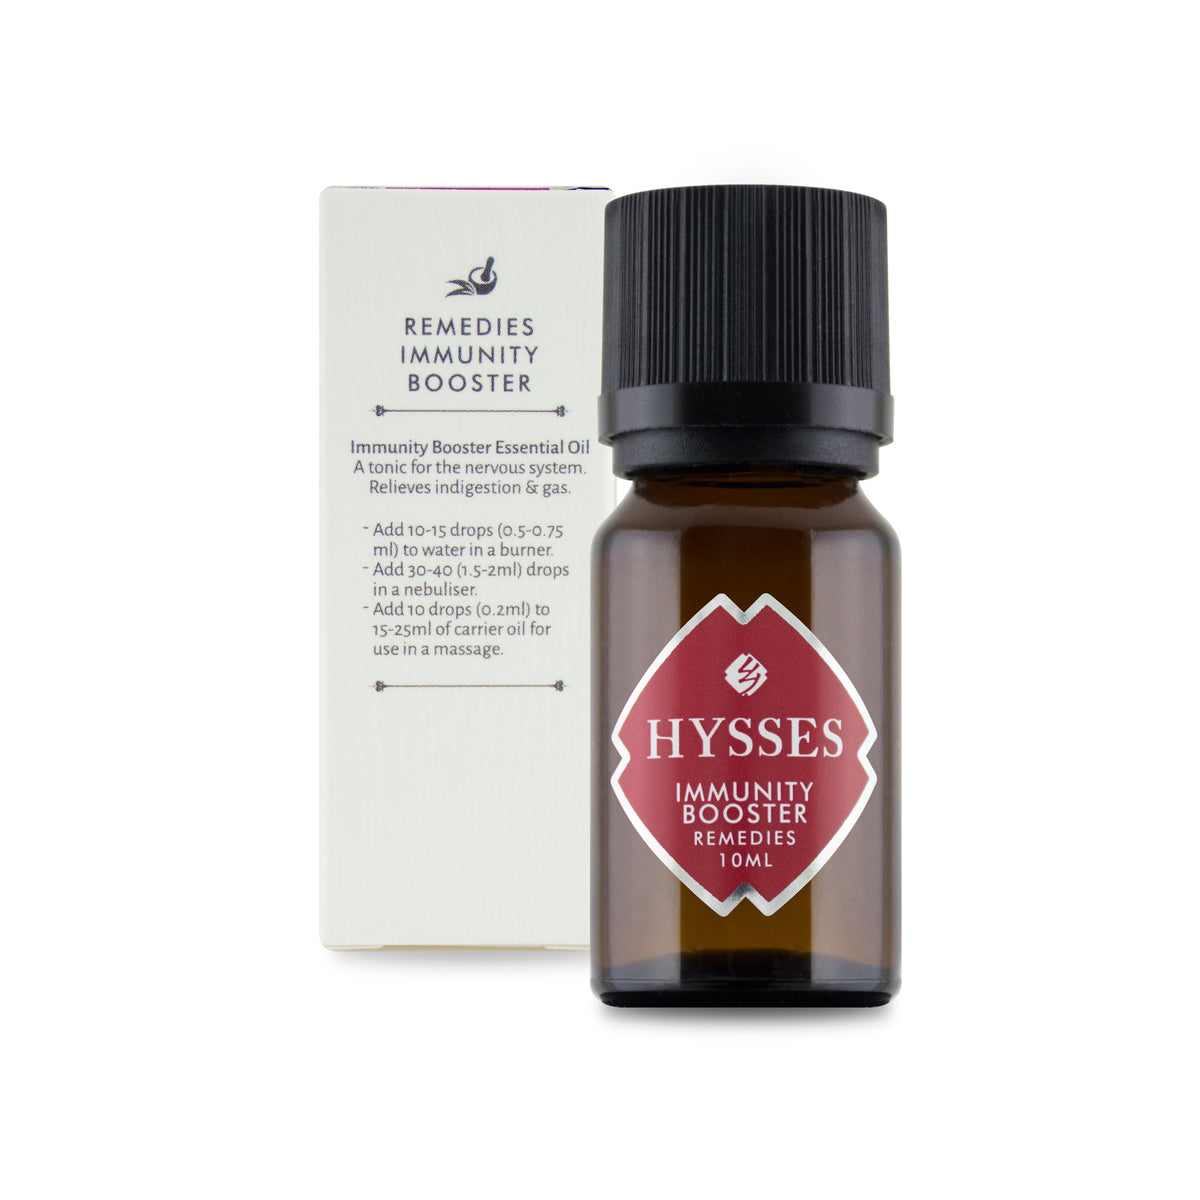 Remedies, Immunity Booster - HYSSES